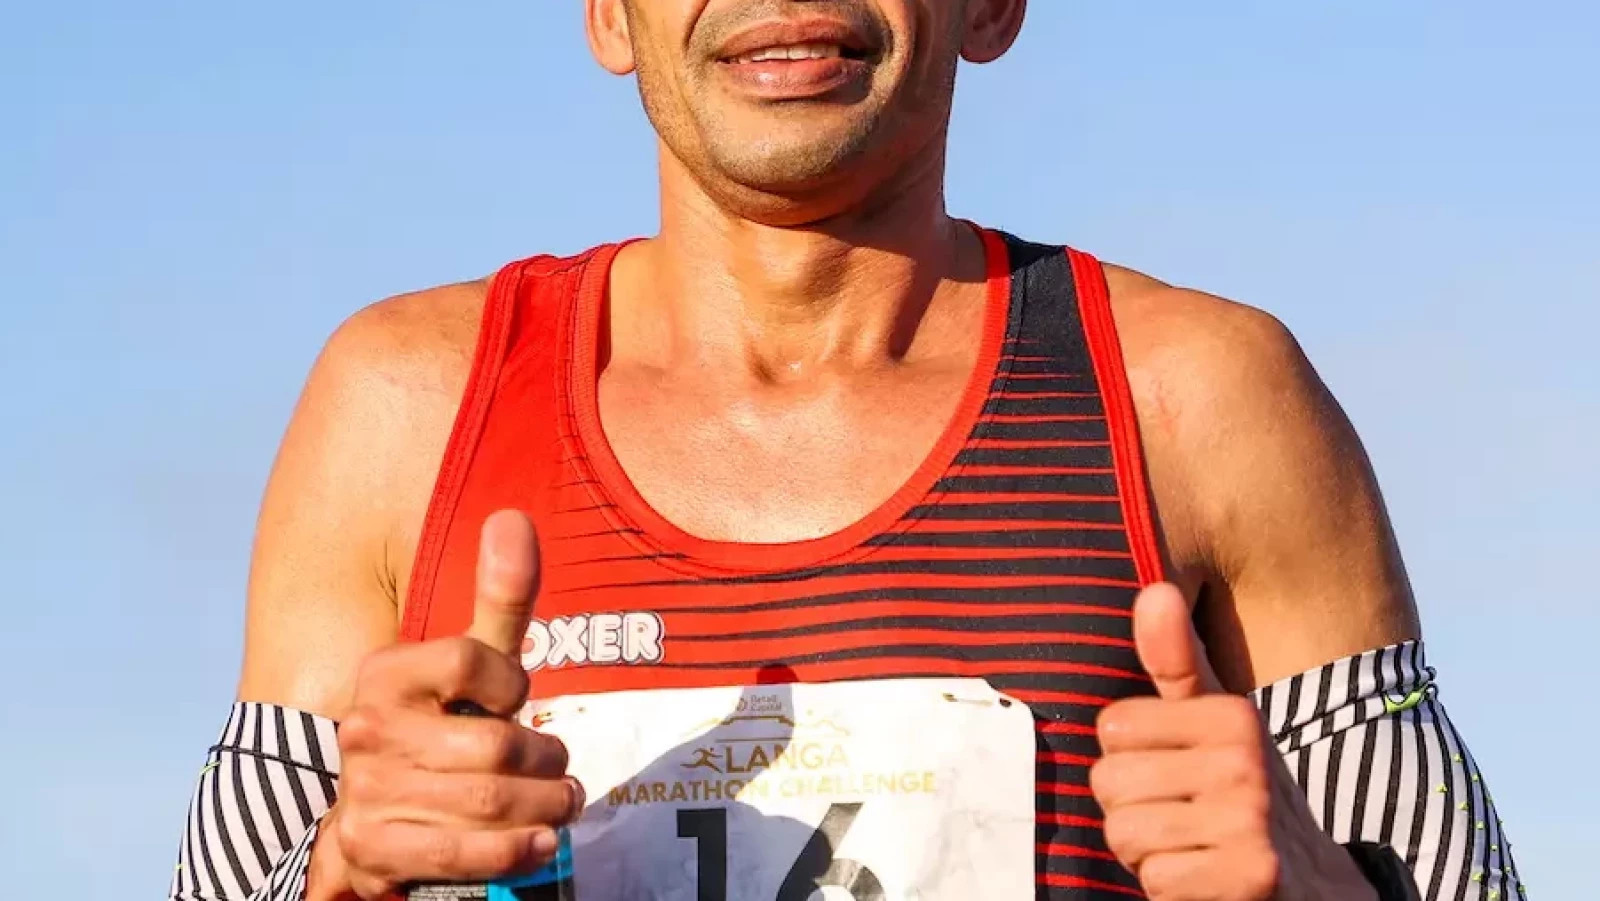 elroy gelant reclaims the sa marathon title with a new course record